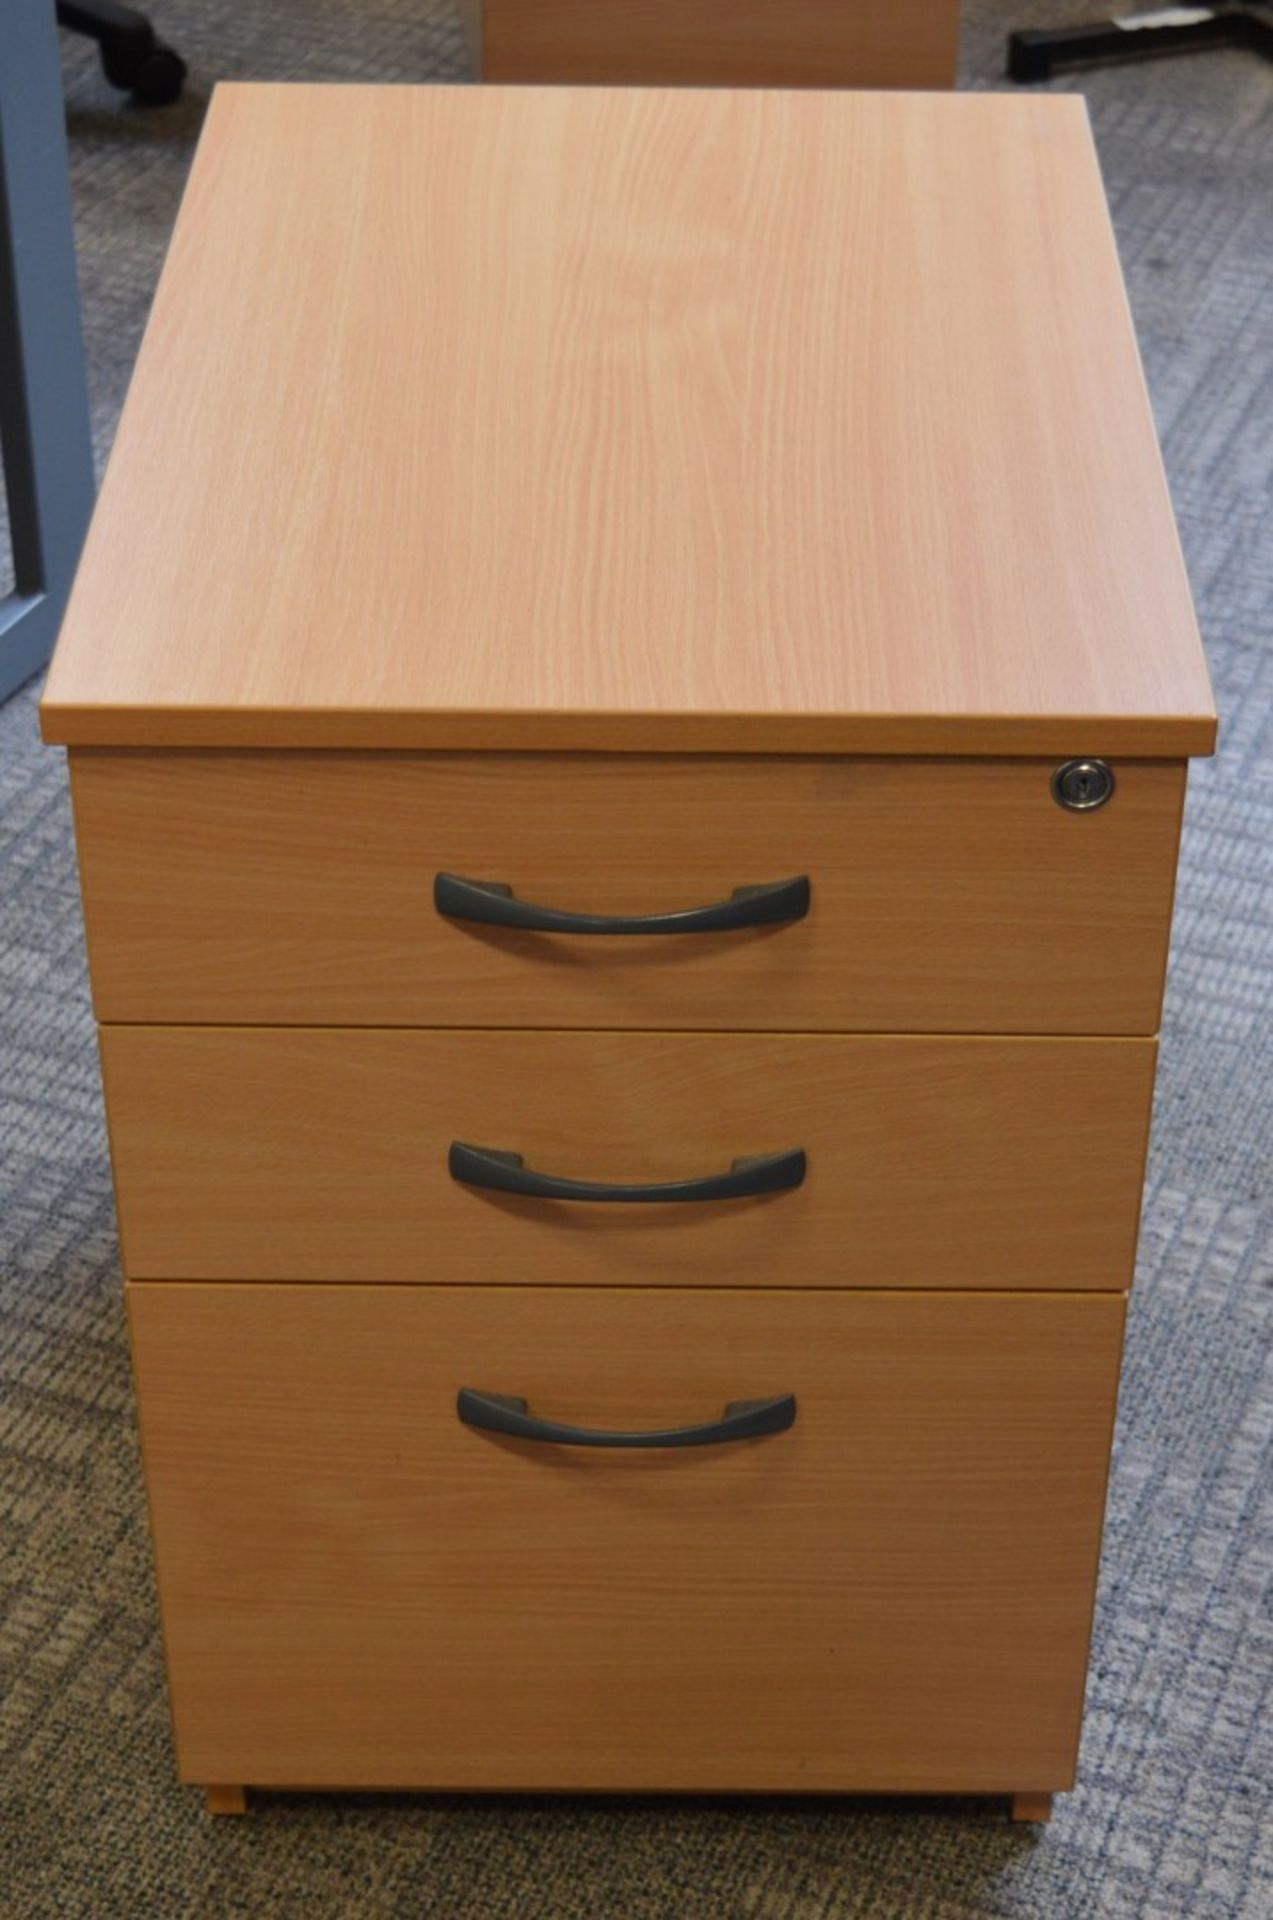 1 x Three Drawer Mobile Pedestal Drawers - With NO Key - Modern Beech Finish - Two Storage Drawers - Image 3 of 4